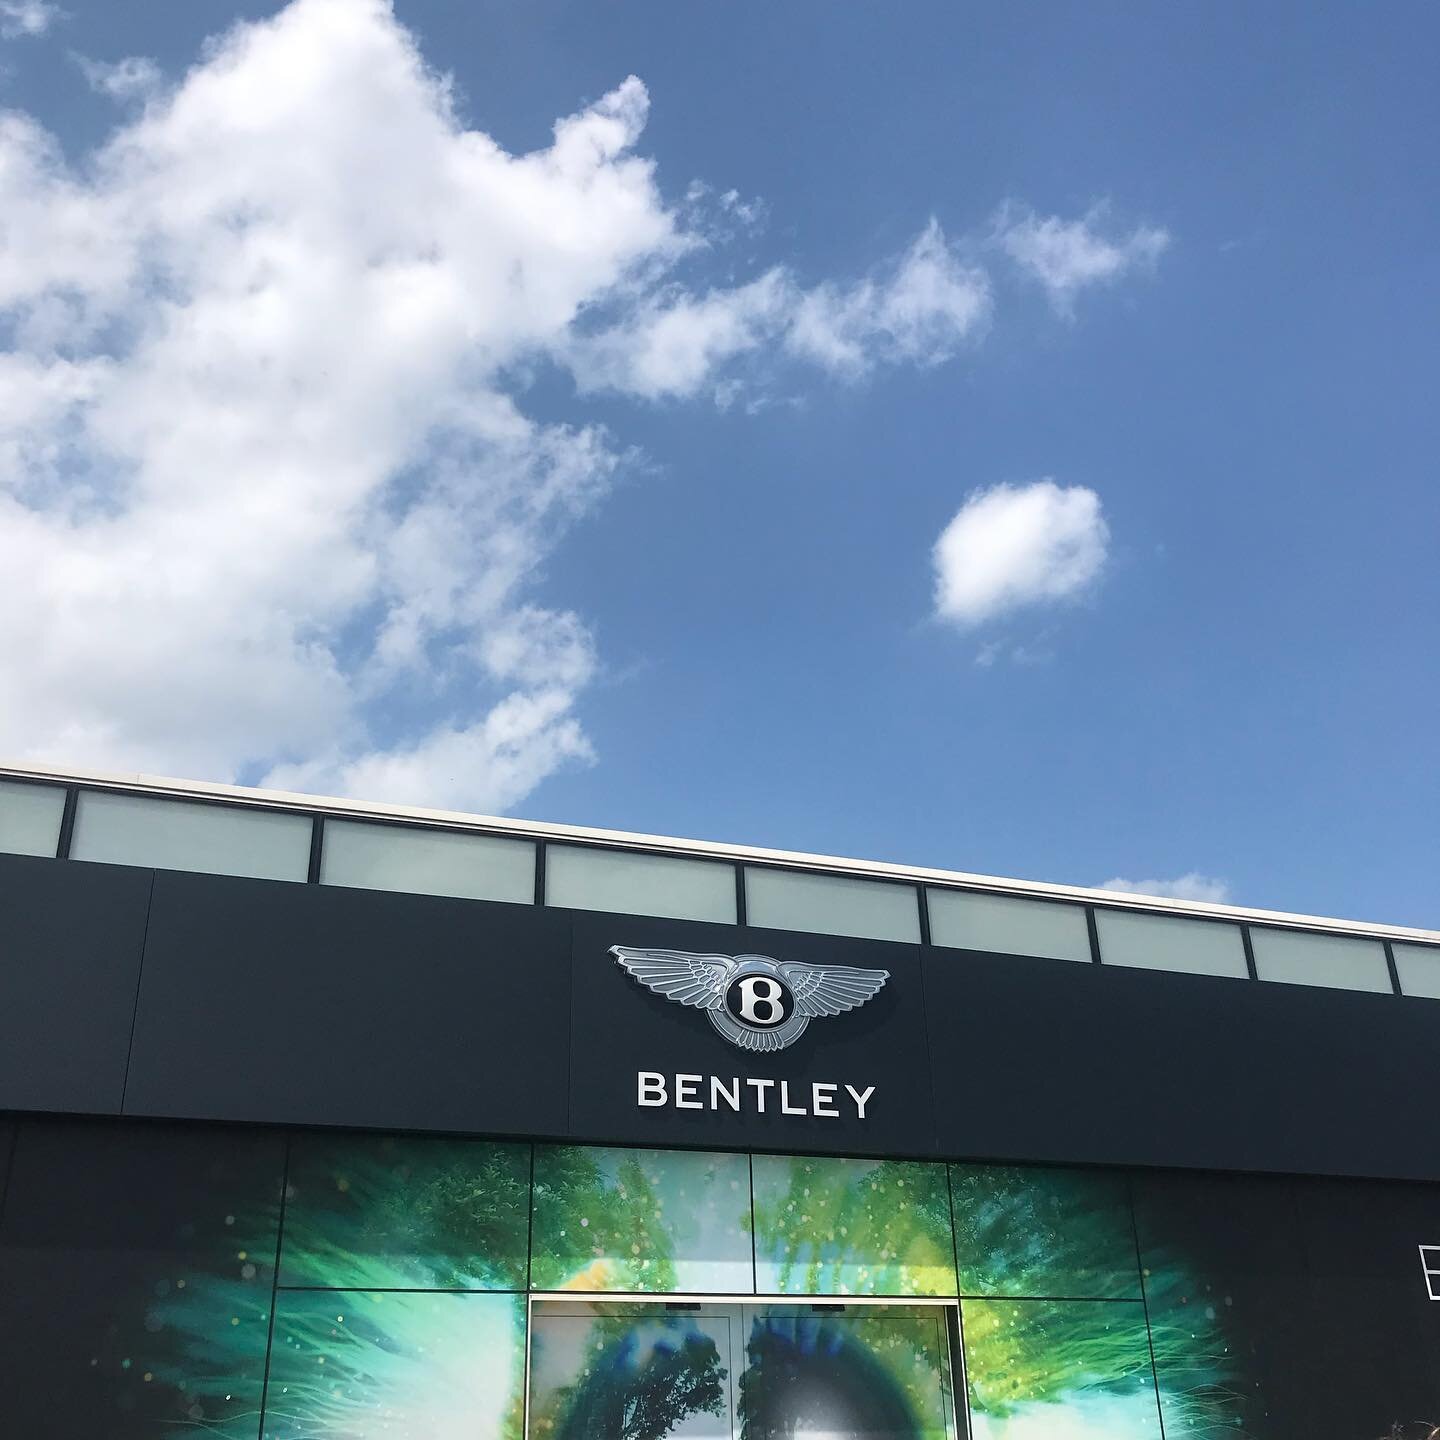 Thank you @bentleymotors &amp; @wallpapermag for a great day trip to Crewe, celebrating the launch of the #bentleyexp100gt yesterday